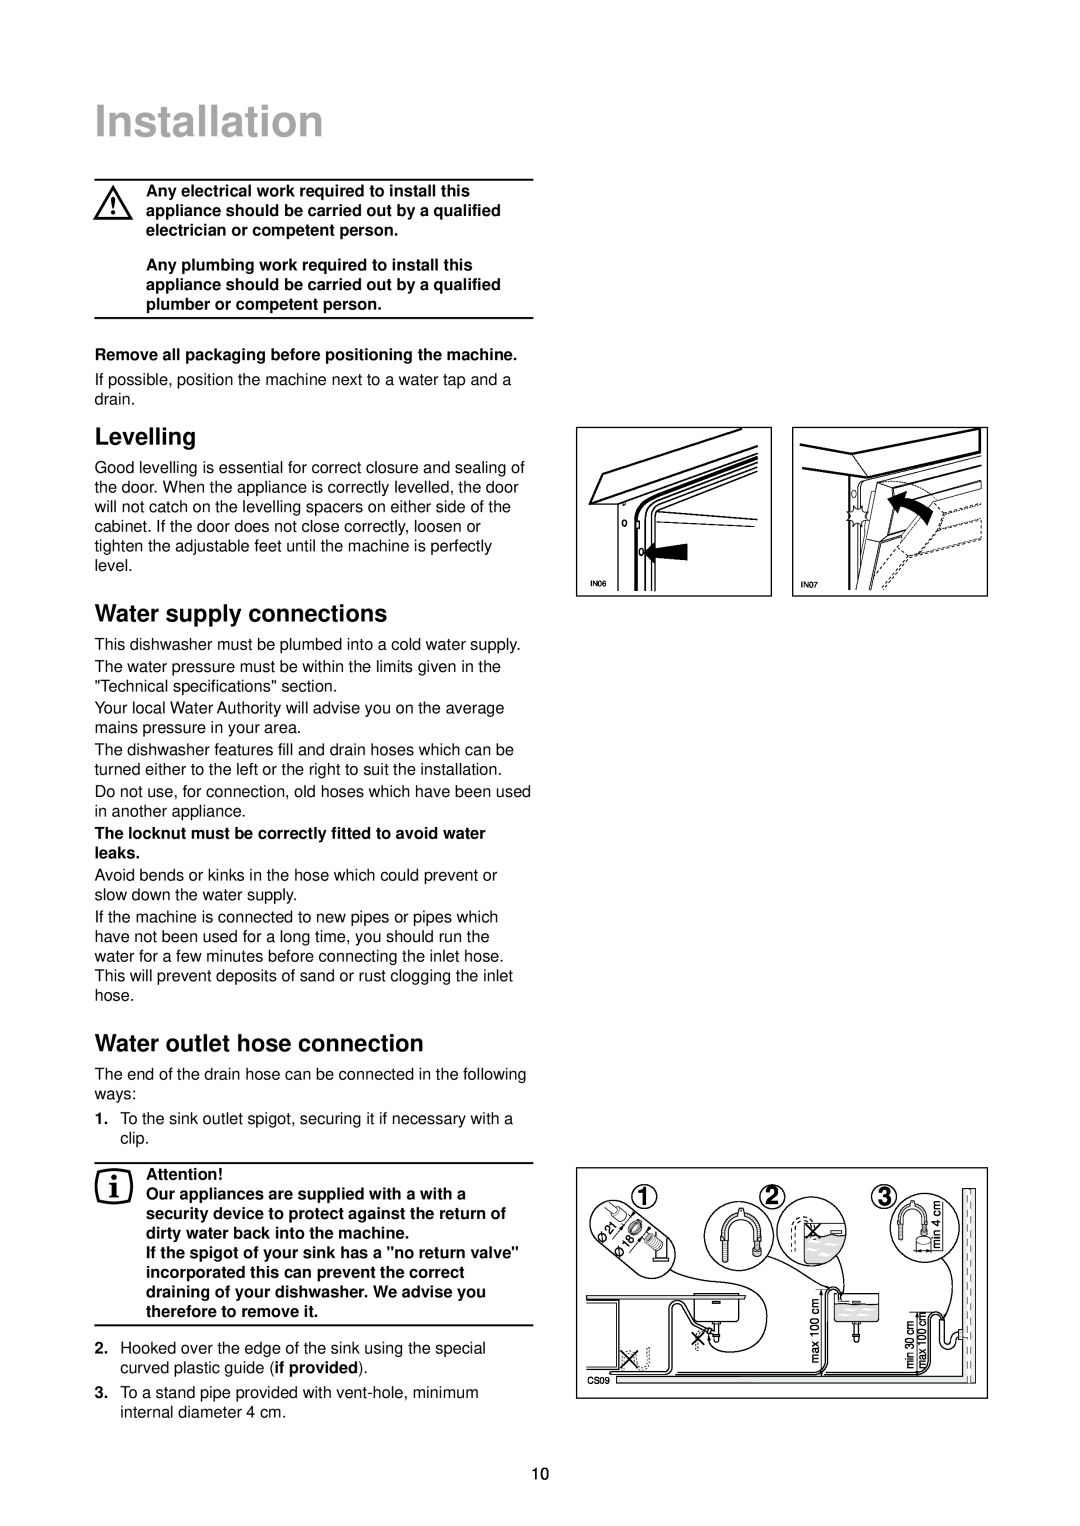 Zanussi DA 6141 Installation, Levelling, Water supply connections, Water outlet hose connection, Technical specifications 